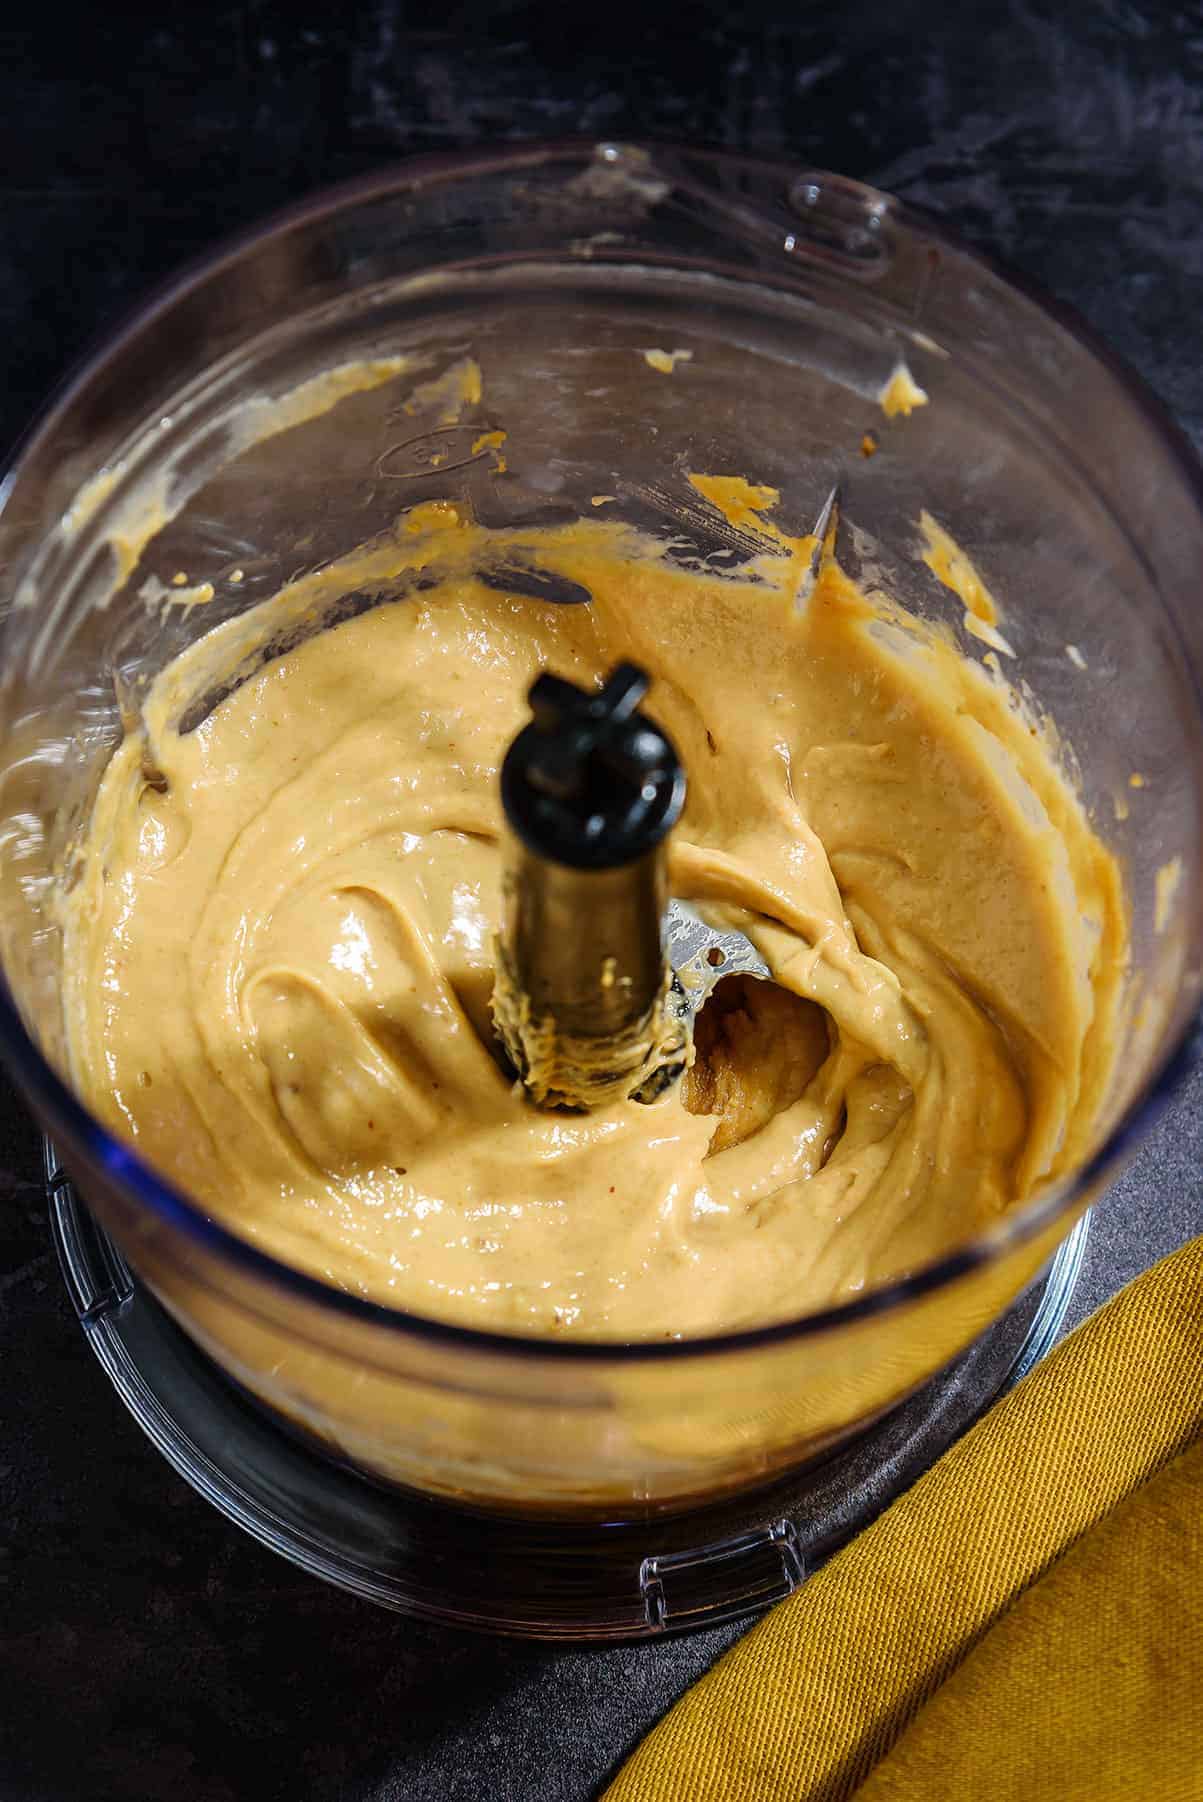 Blended peanut-butter and banana